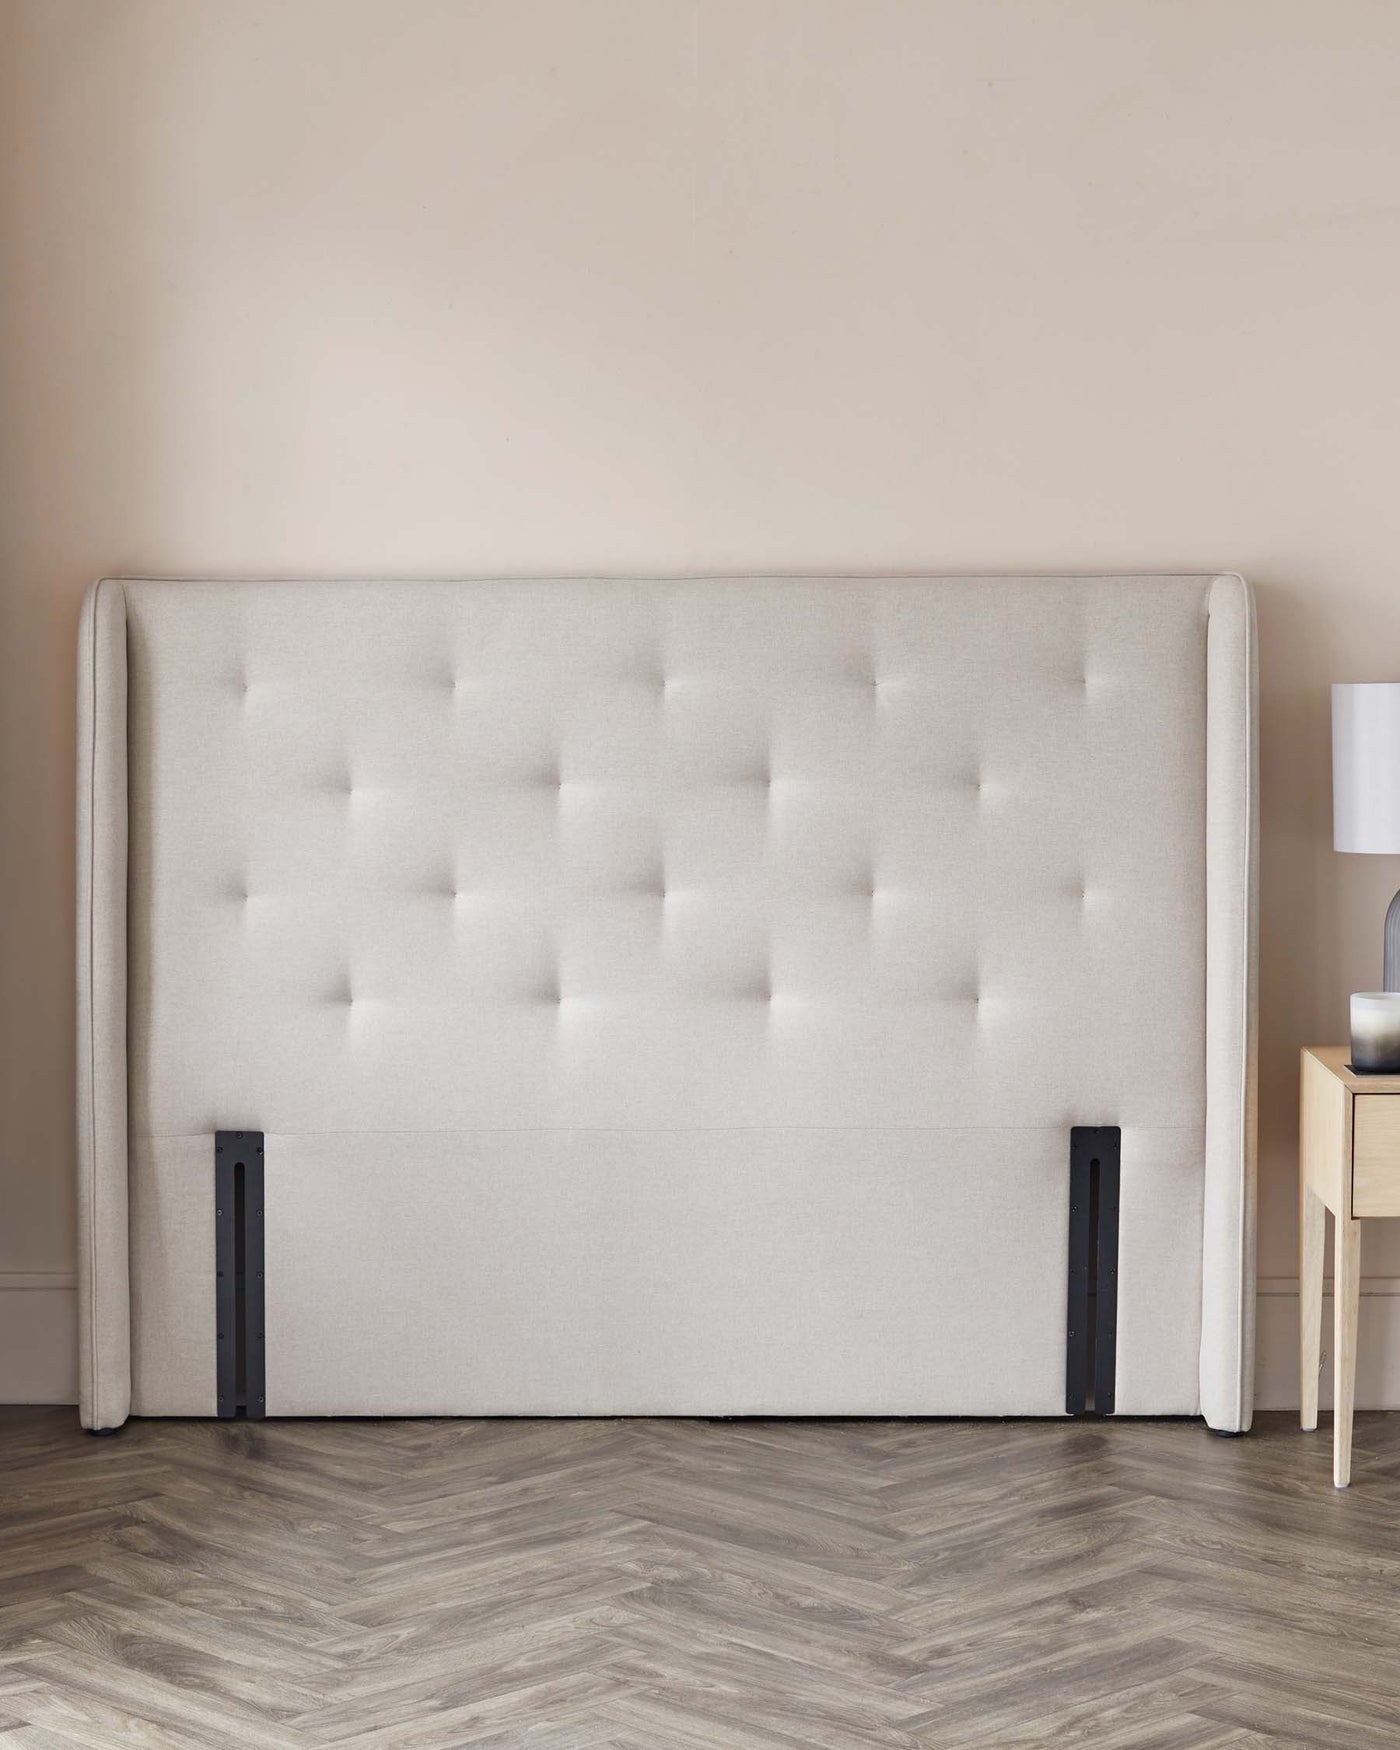 Elegant upholstered king-sized bed headboard in a light neutral colour with diamond tufting and clean, straight edges. Contemporary wooden bedside table with a drawer stands next to it, featuring a simple lamp atop.